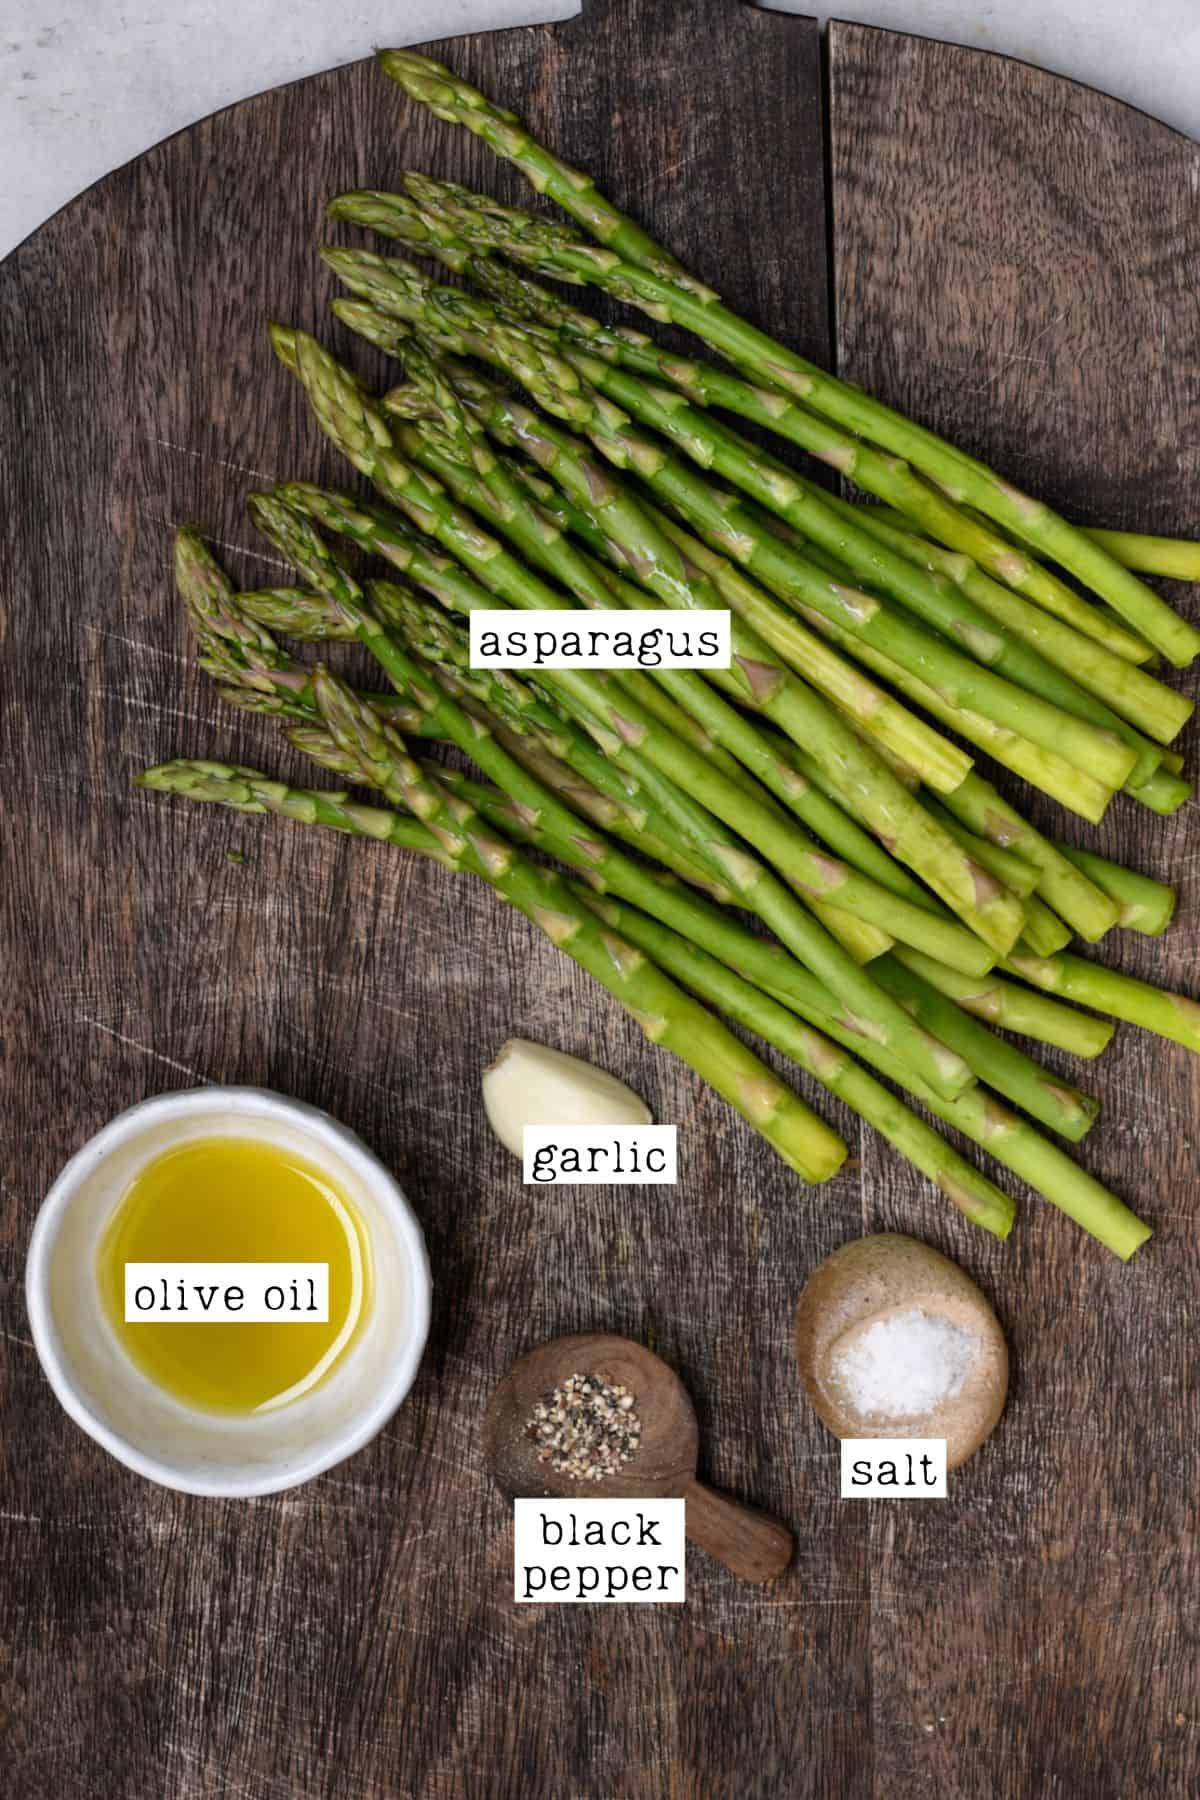 Ingredients for roasted asparagus